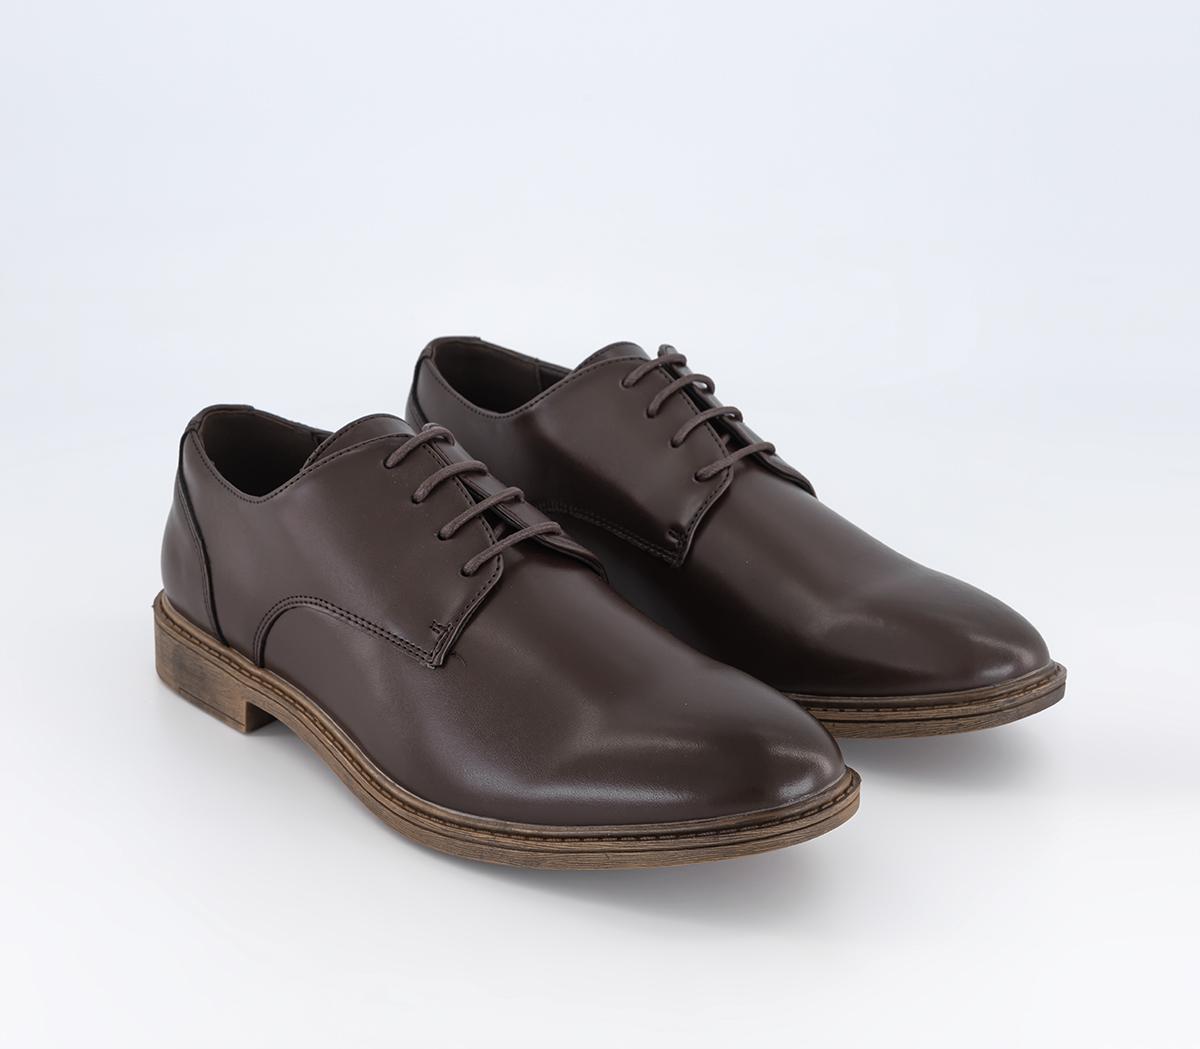 OFFICE Mens Curton Leather Derby Shoes Brown, 7